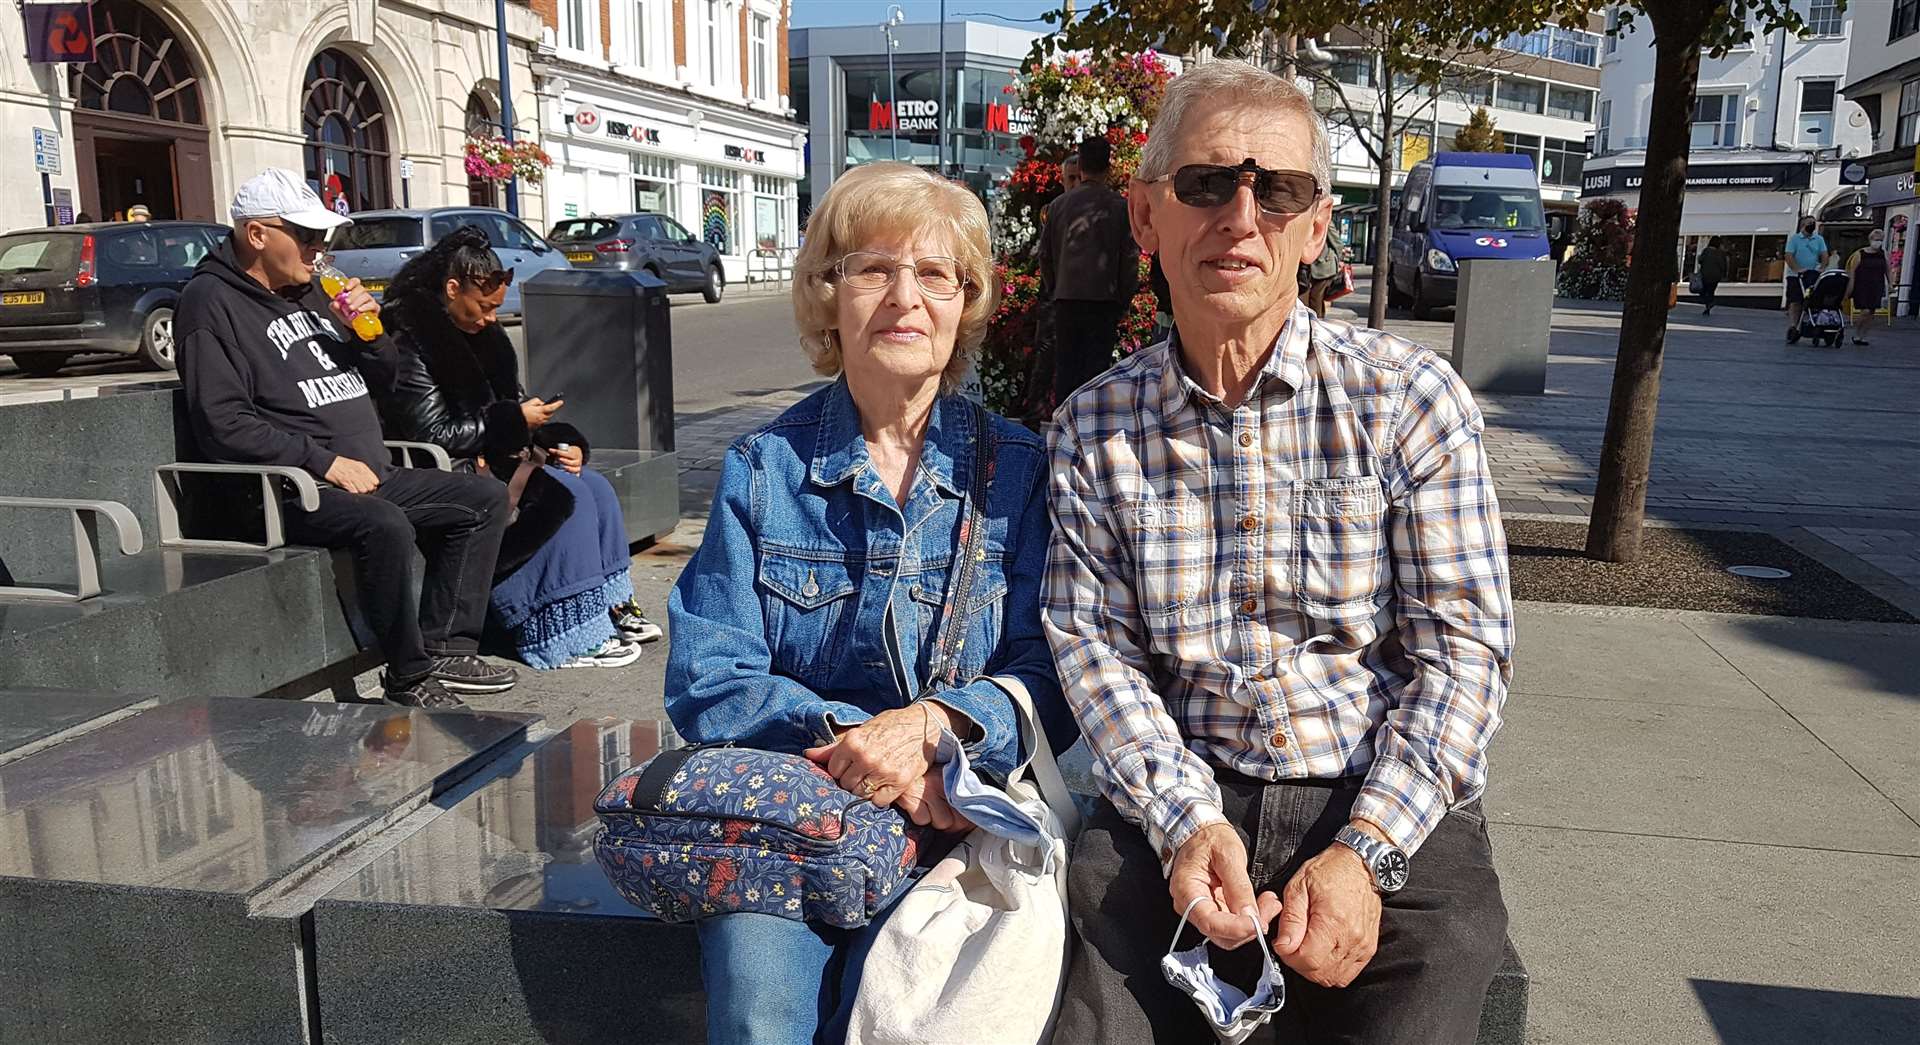 Sylvia and Derek Barnard from Wrotham Heath travelled to Maidstone for the first time since Christmas